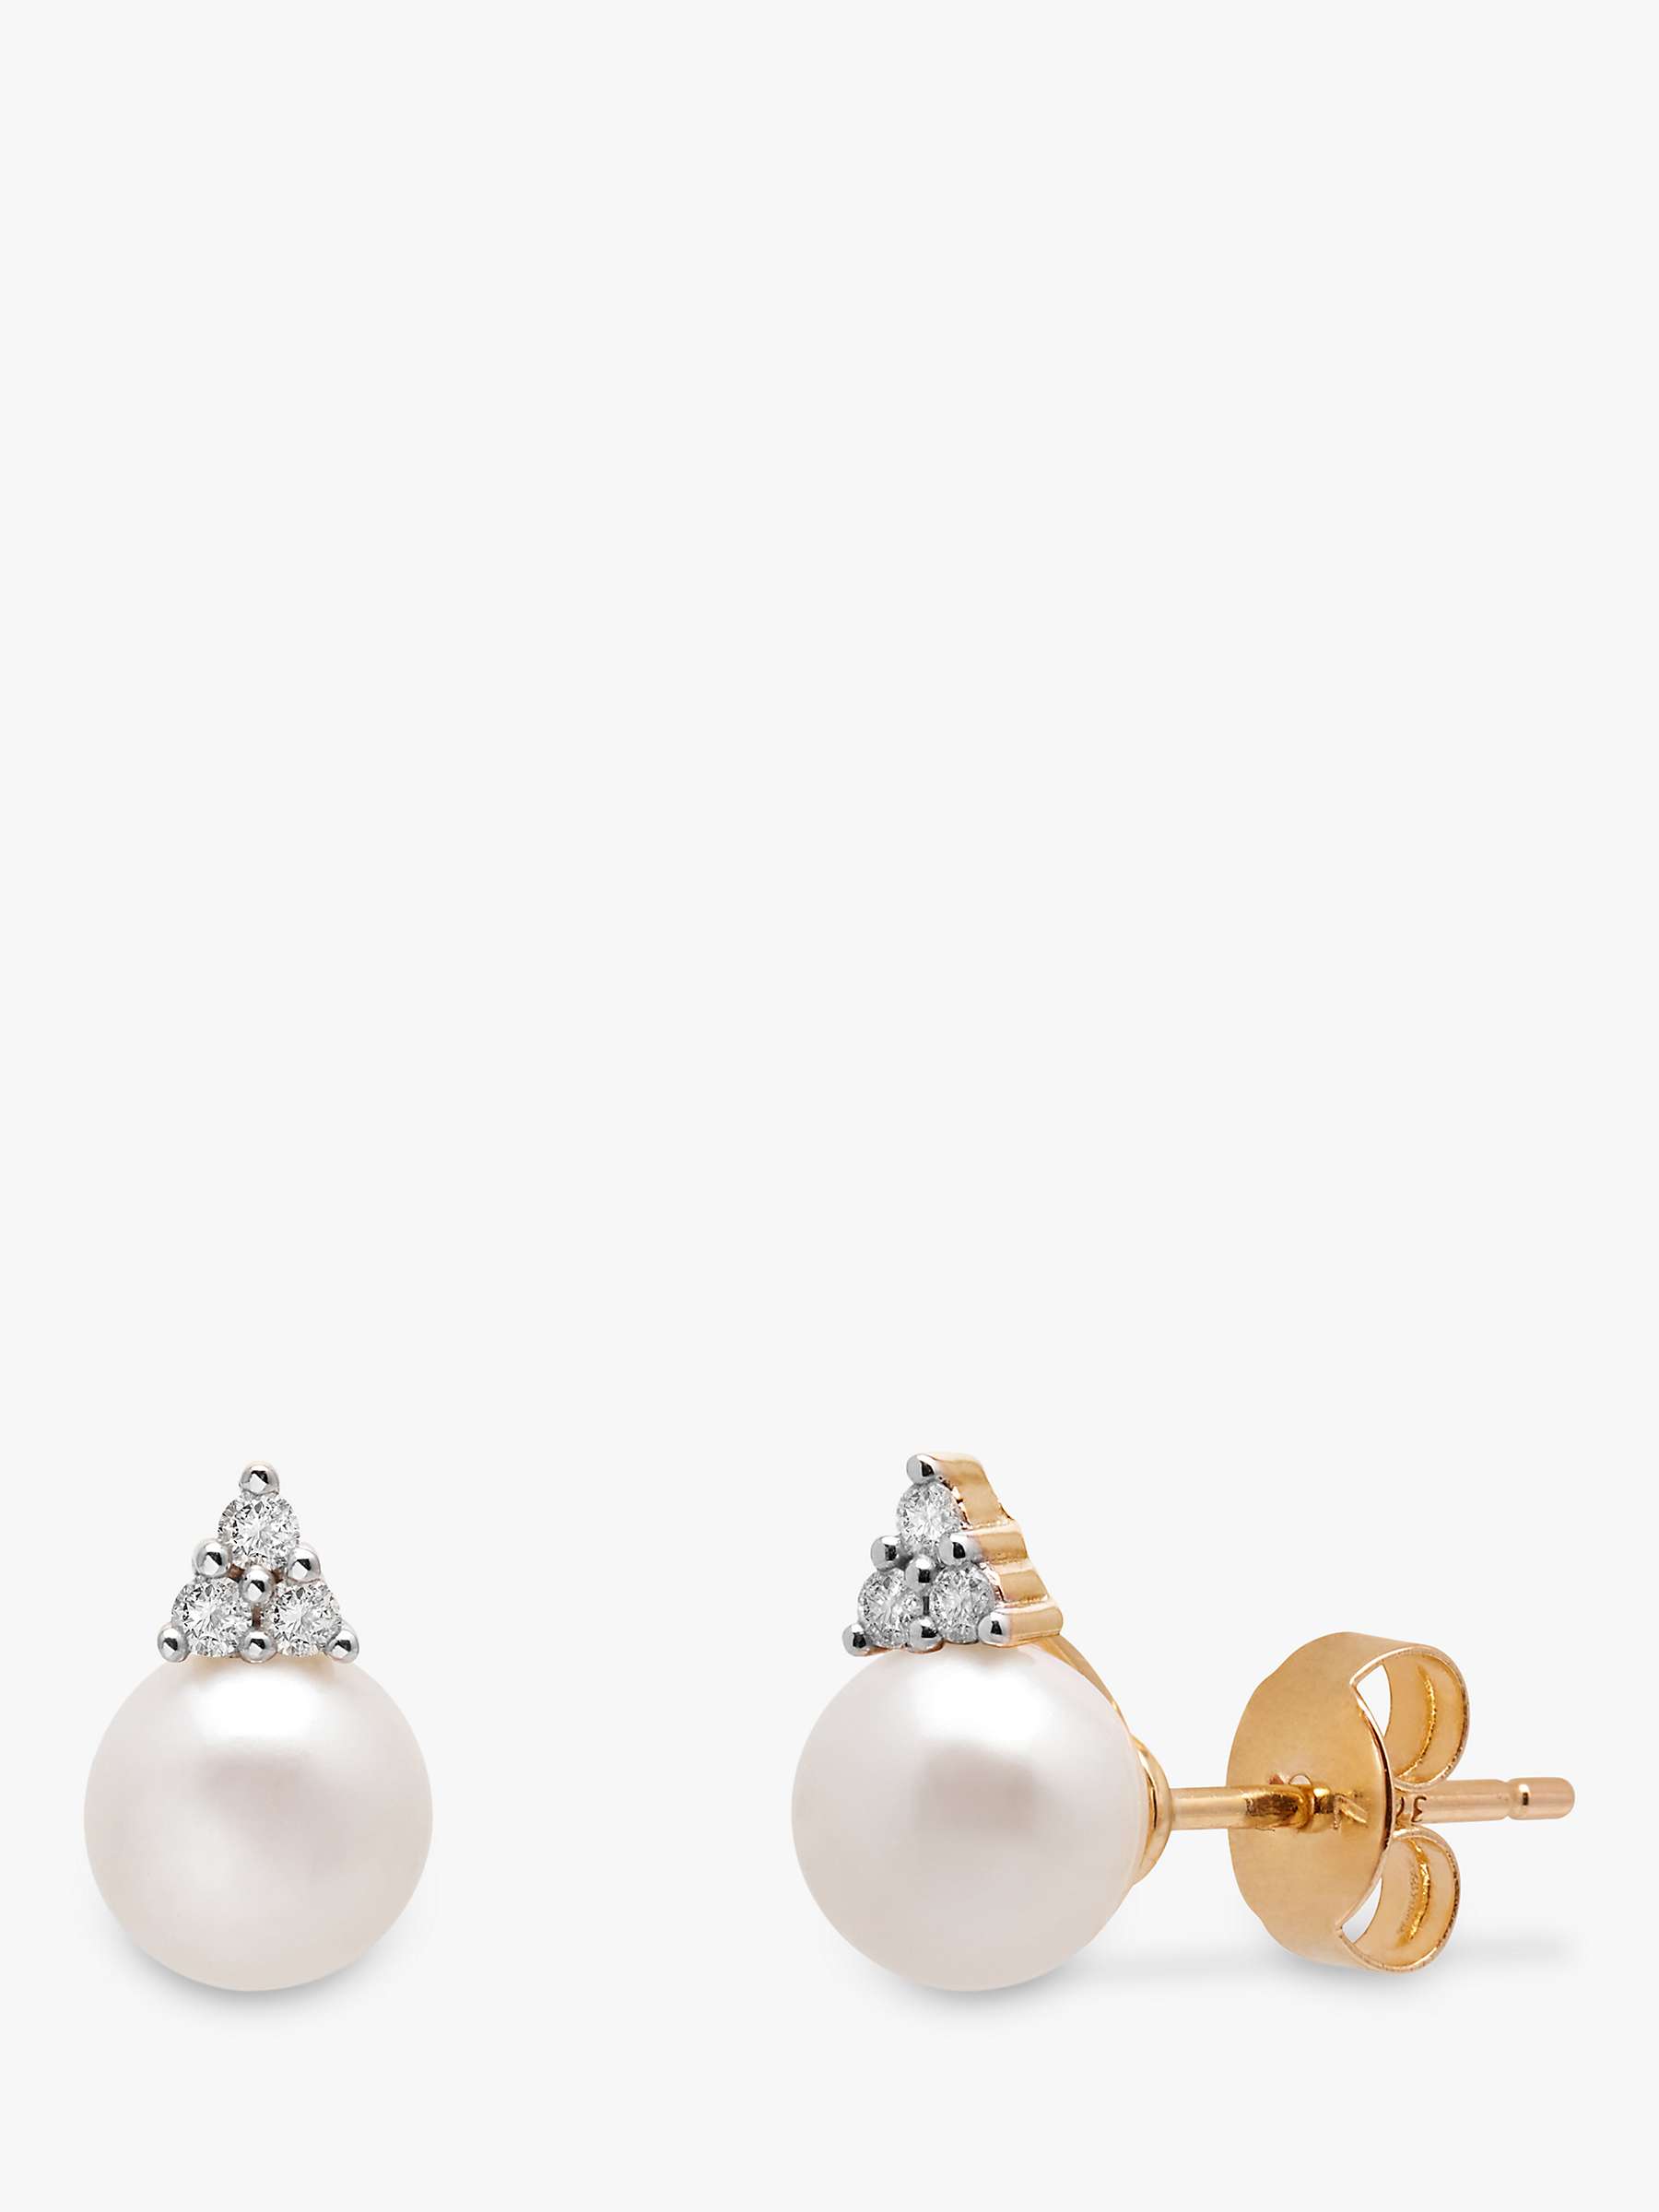 Buy A B Davis 9ct Gold Freshwater Pearl and Diamond Stud Earrings, White Online at johnlewis.com